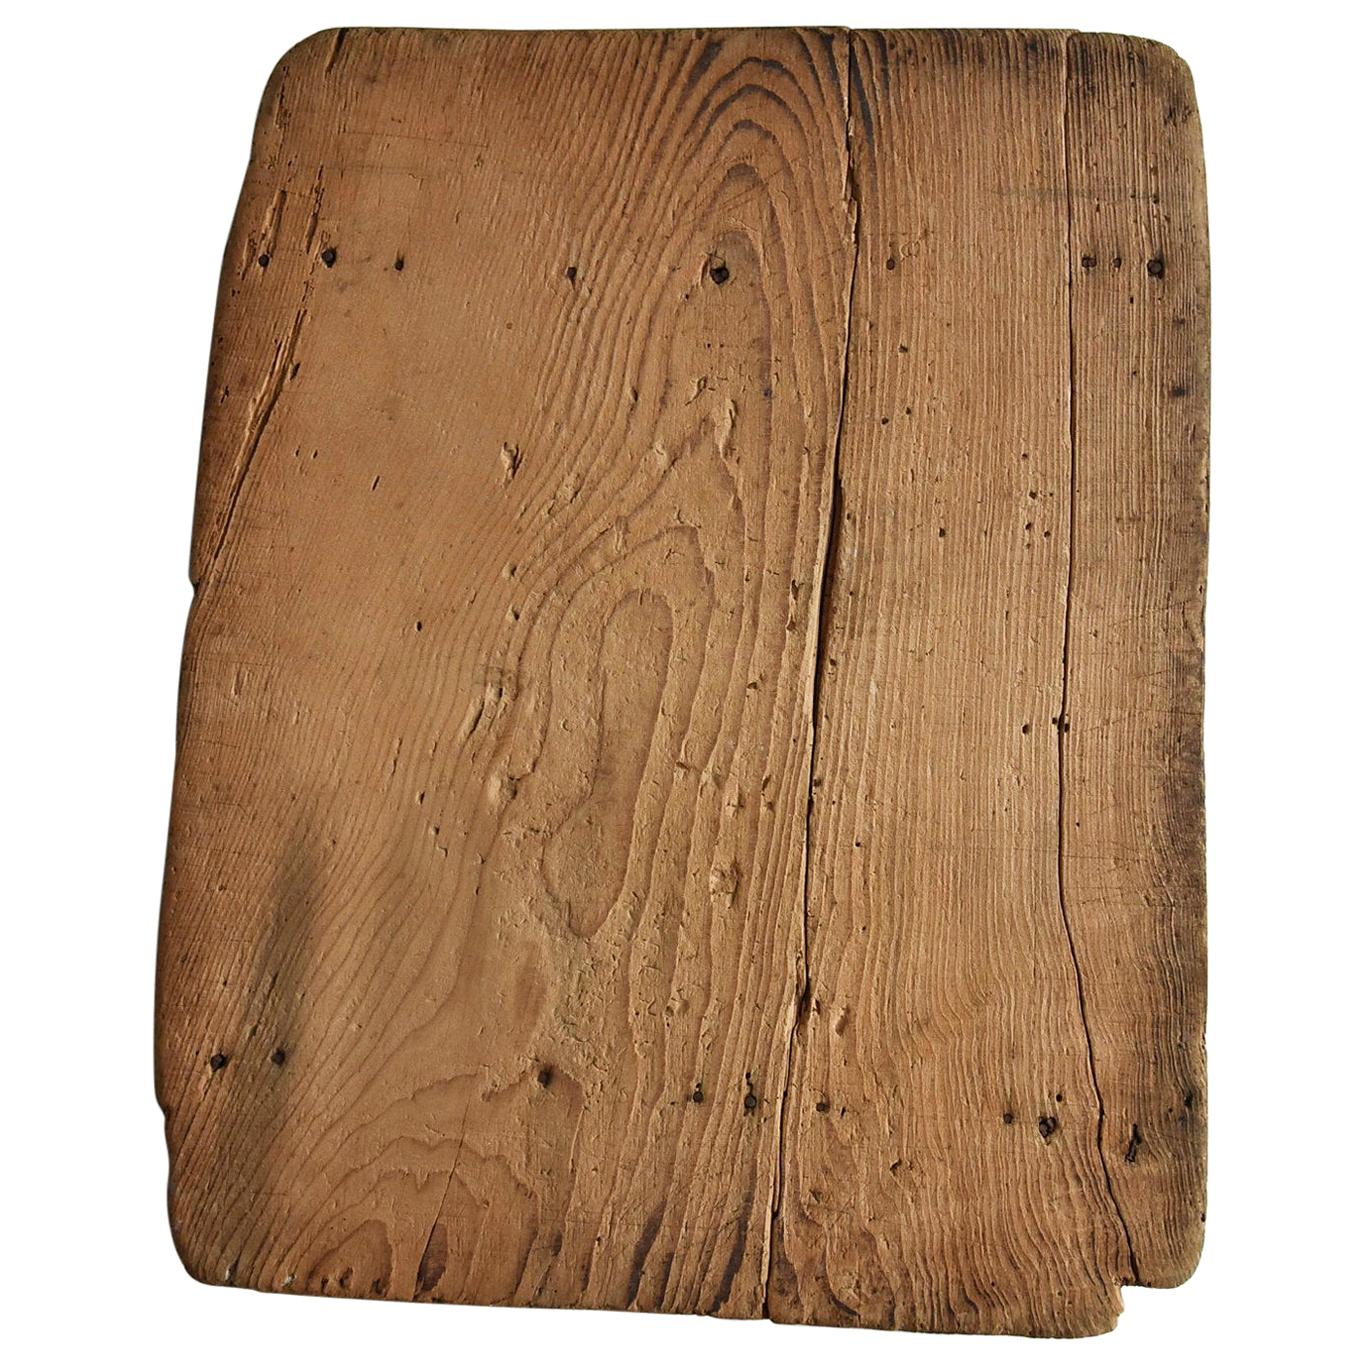 Around the 20th Century, Old Japanese Wooden Boards or Working Boards